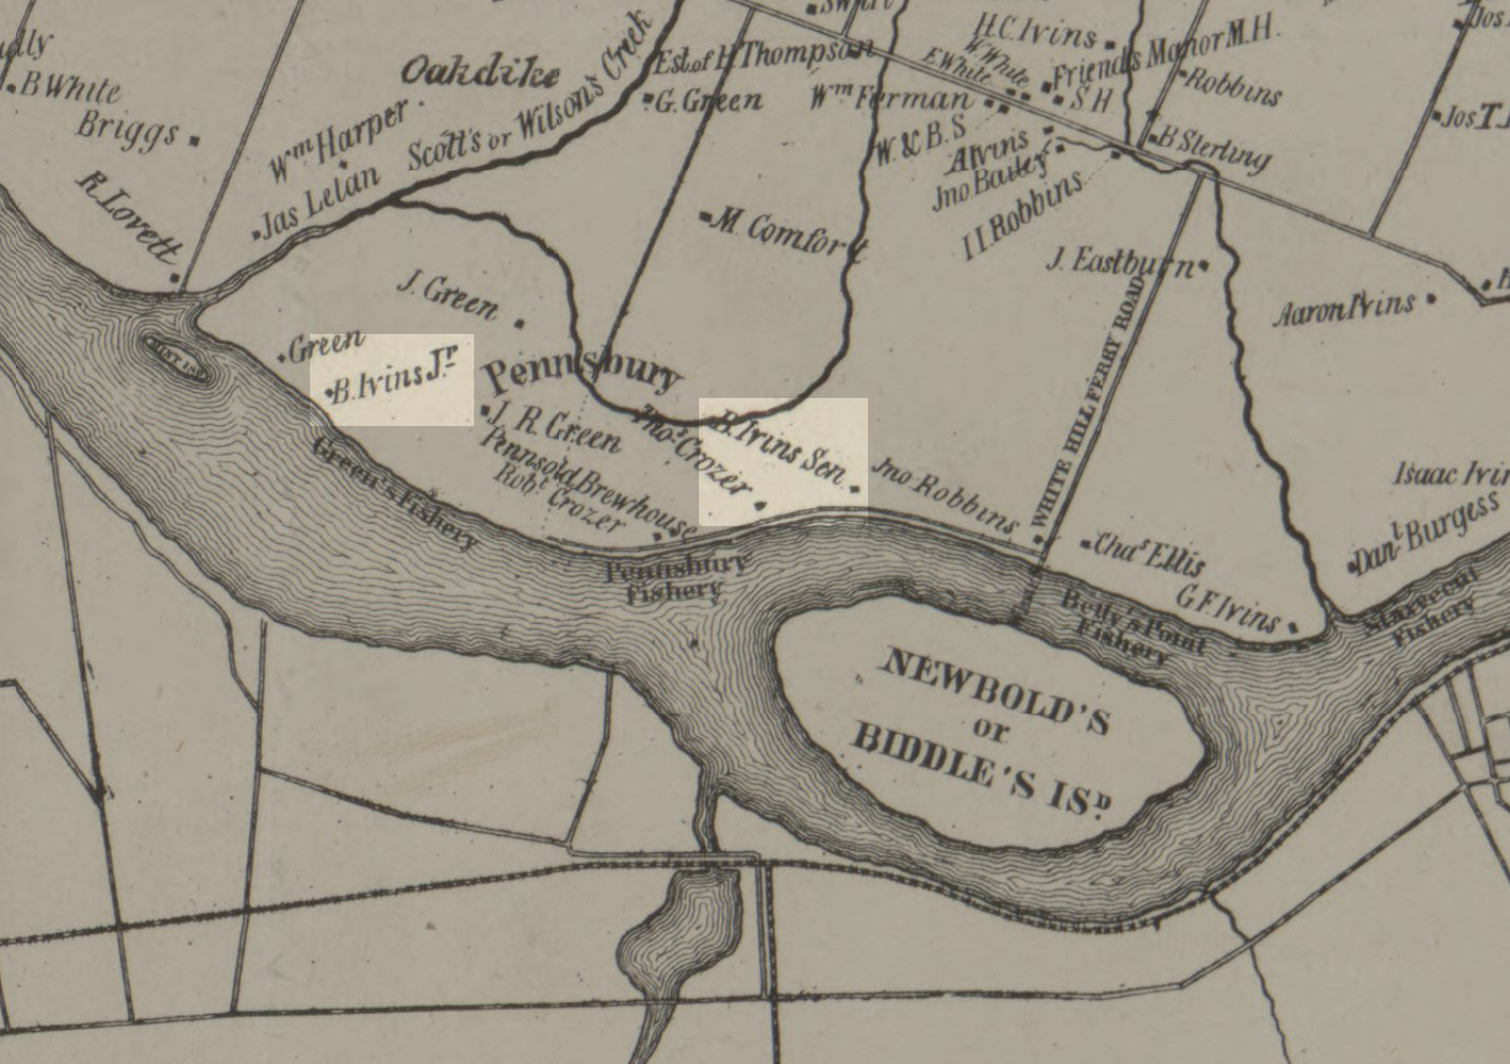 Clip of a map of Falls township with Ivins Jr. and Sr. highlighted.